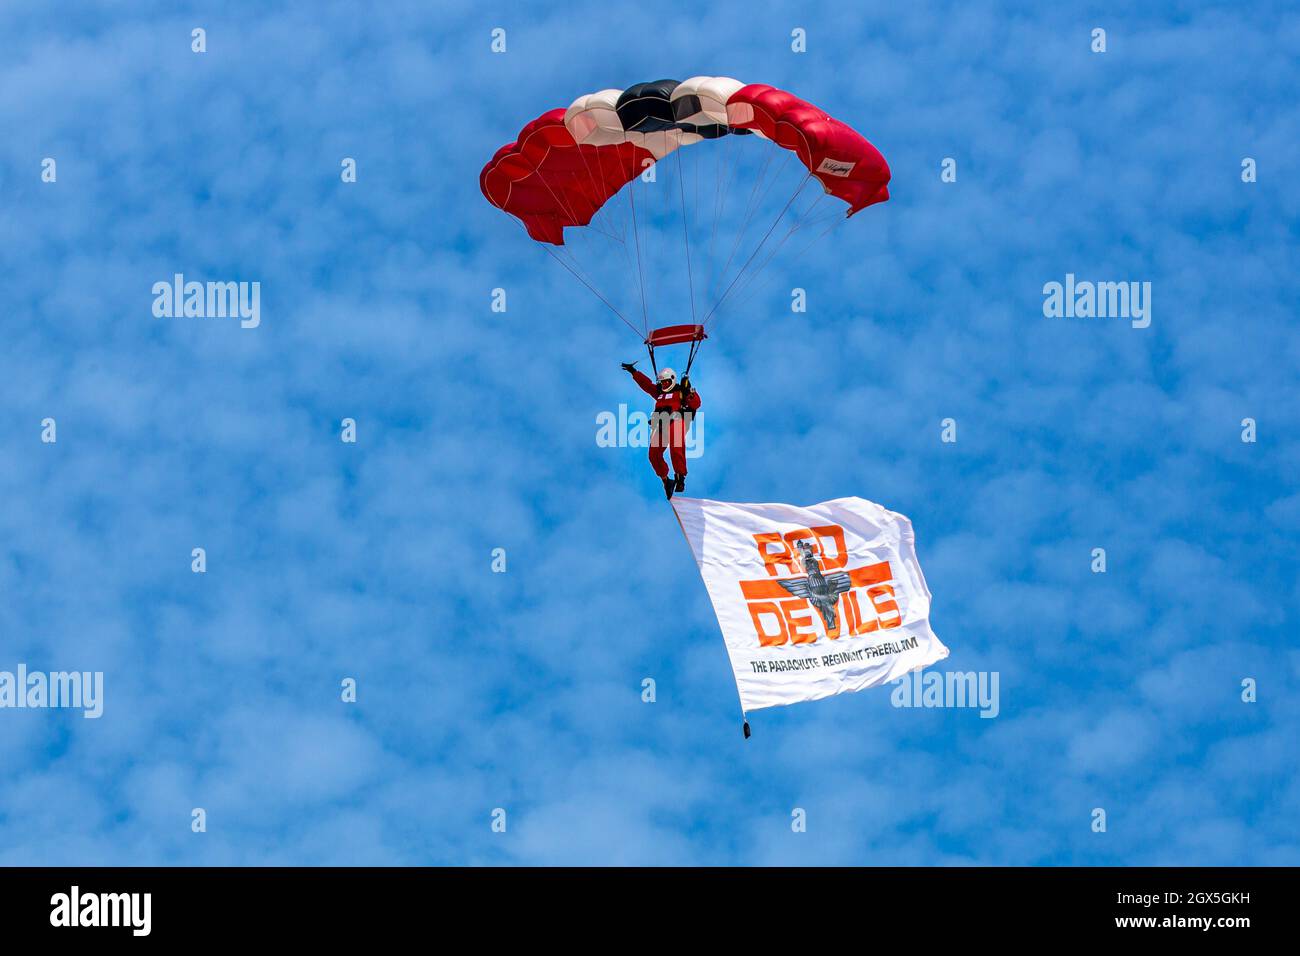 A Red Devils sky diving skydiving Display in Dorset Stock Photo